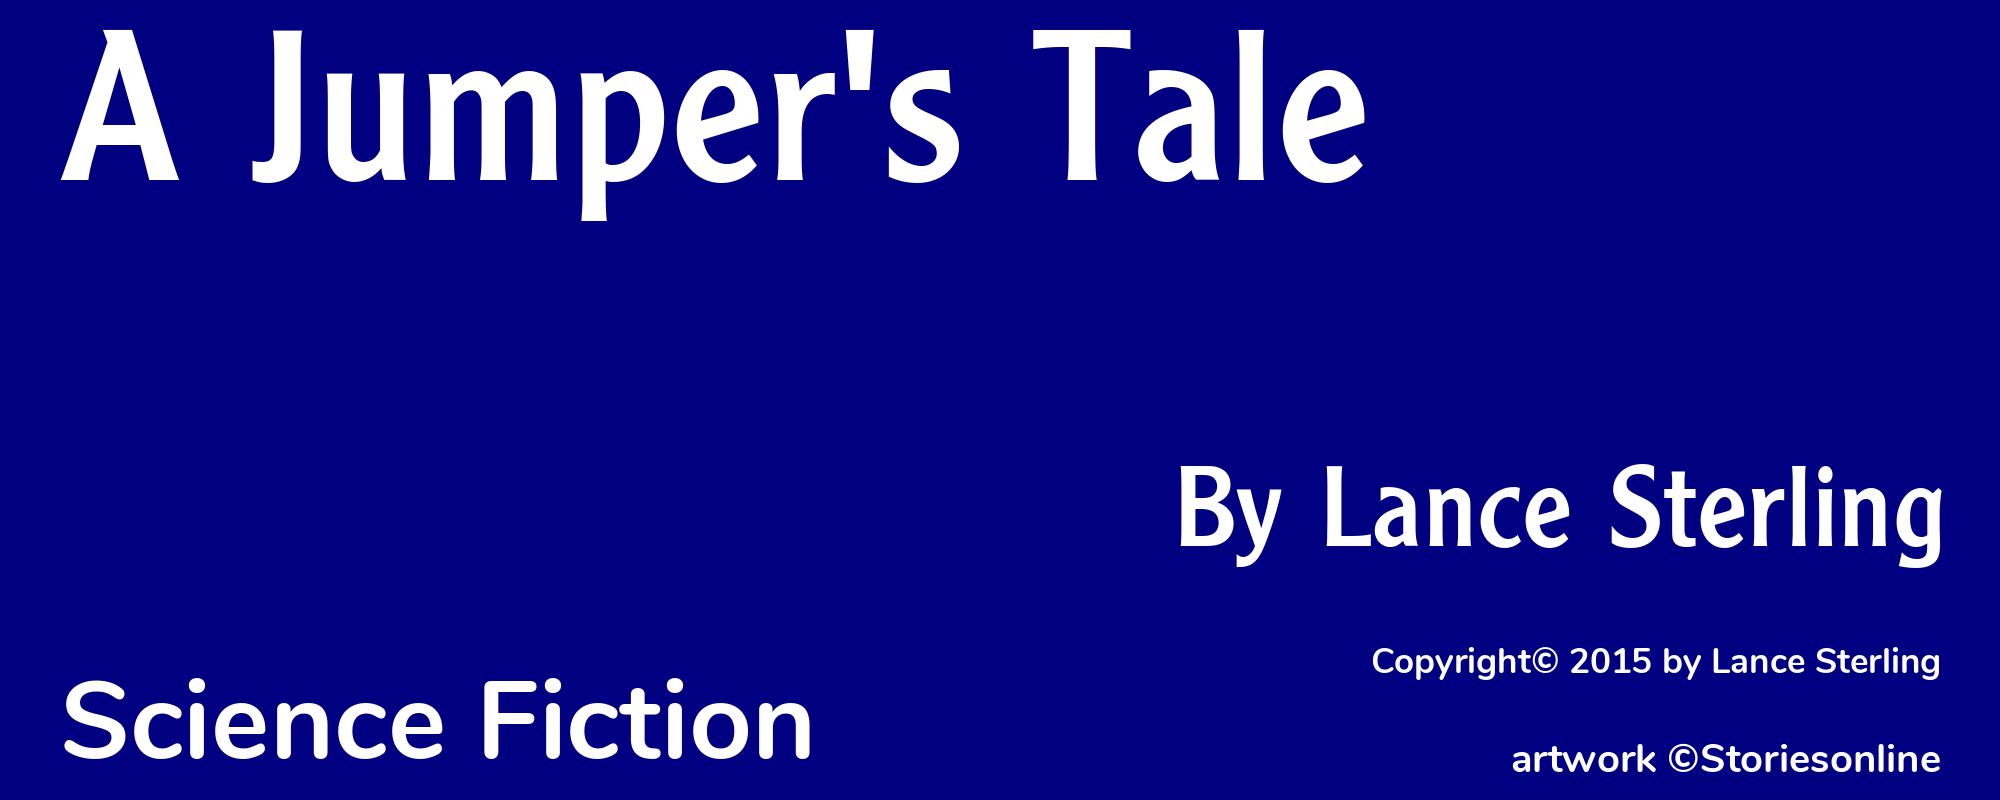 A Jumper's Tale - Cover